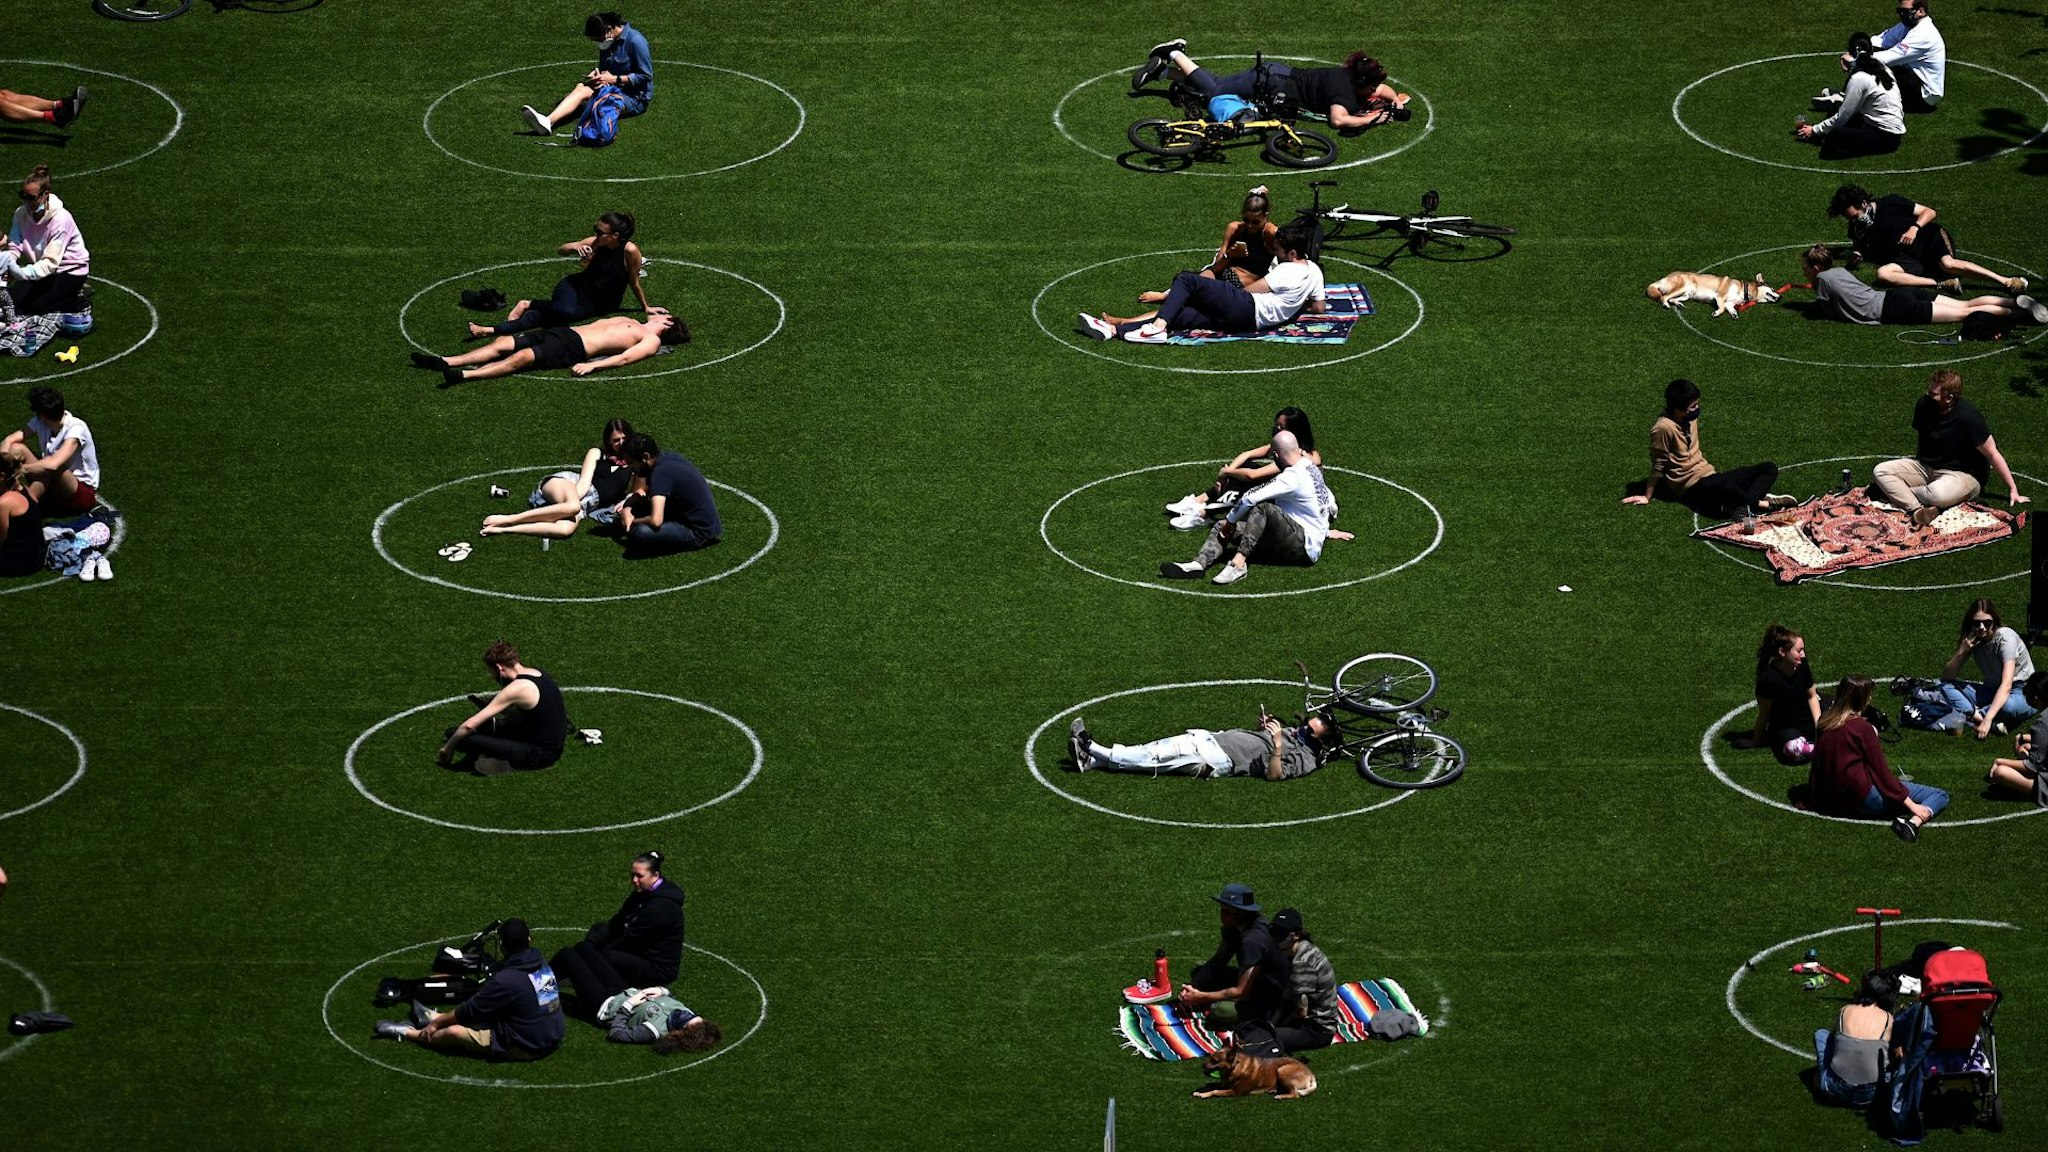 TOPSHOT - People are seen practising social distancing in white circles in Domino Park, during the Covid-19 pandemic on May 17, 2020 the in Brooklyn borough of New York City.